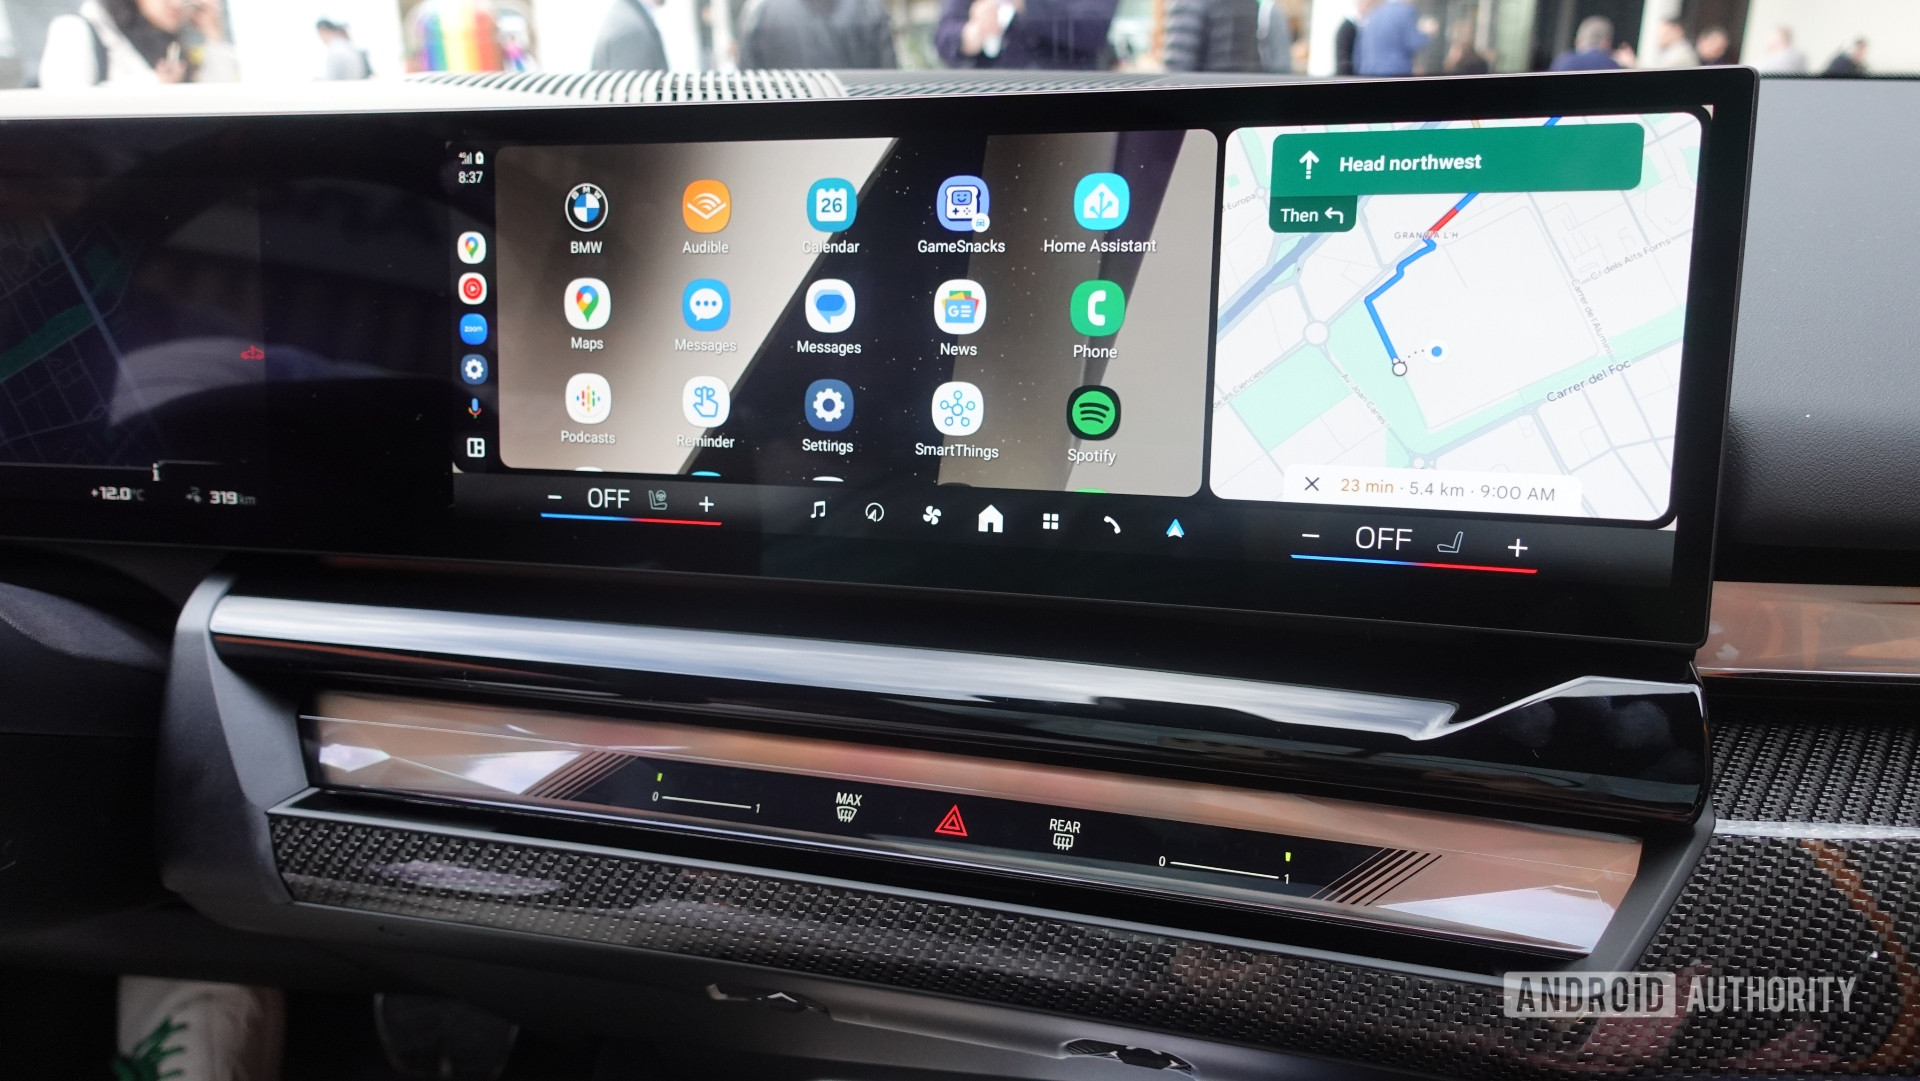 Android Auto now lets you know which apps you can’t use while driving